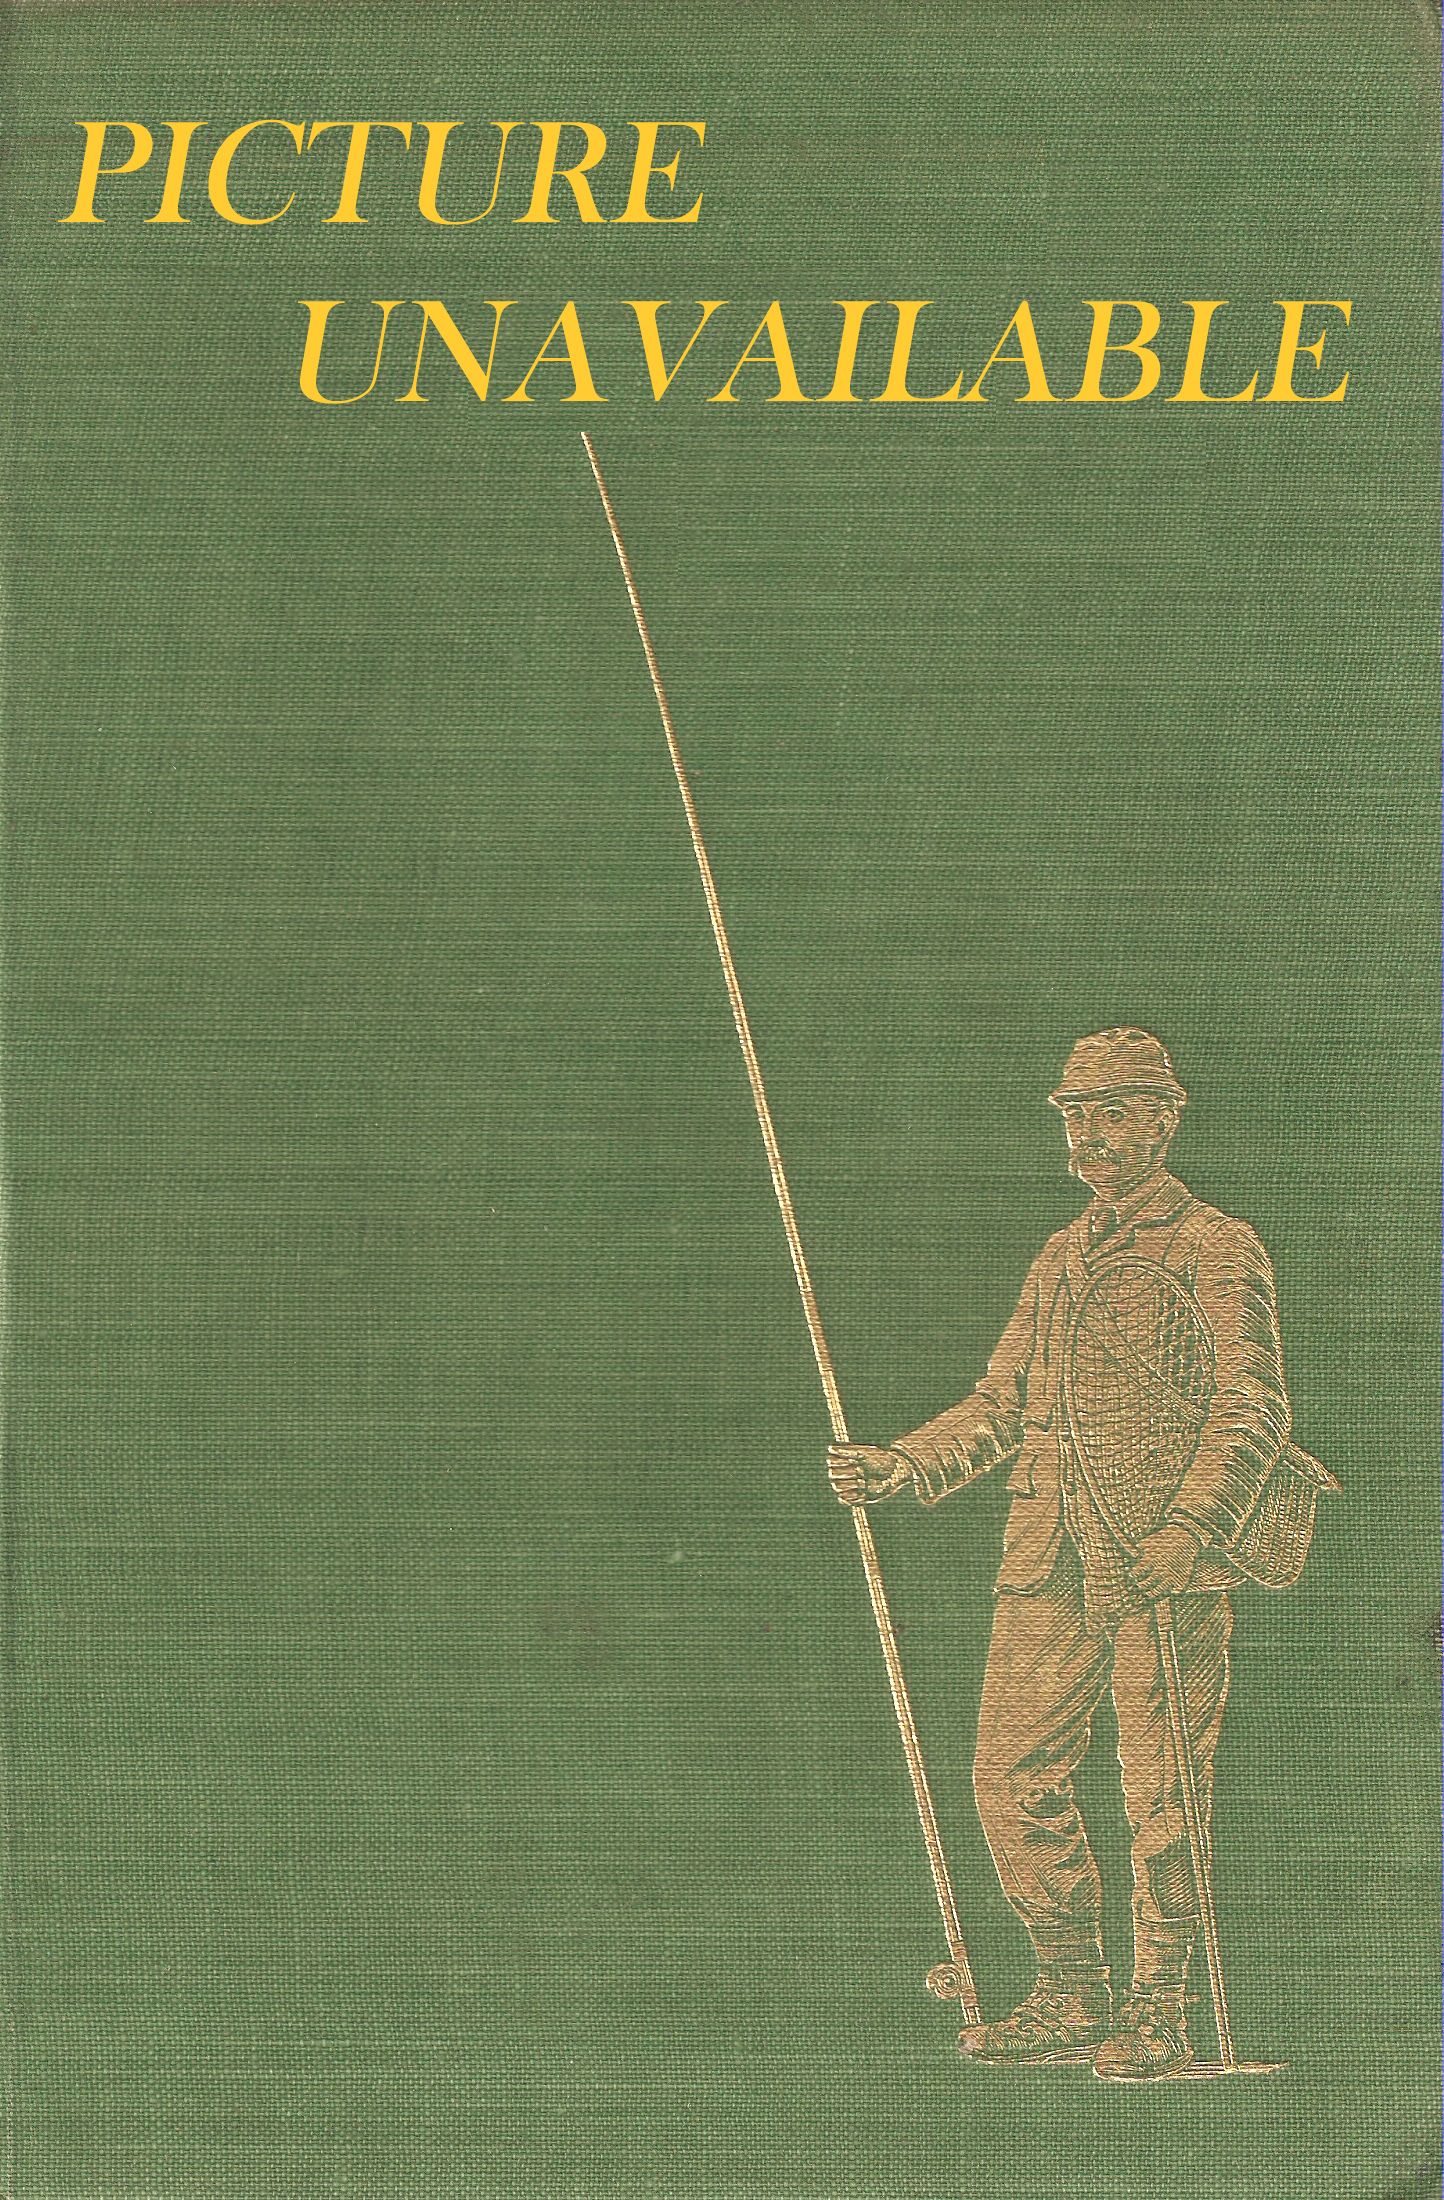 MR. CRABTREE'S GUIDE TO GOOD FISHING TACKLE. By Hal Mount. With  illustrations by David Carl Forbes.